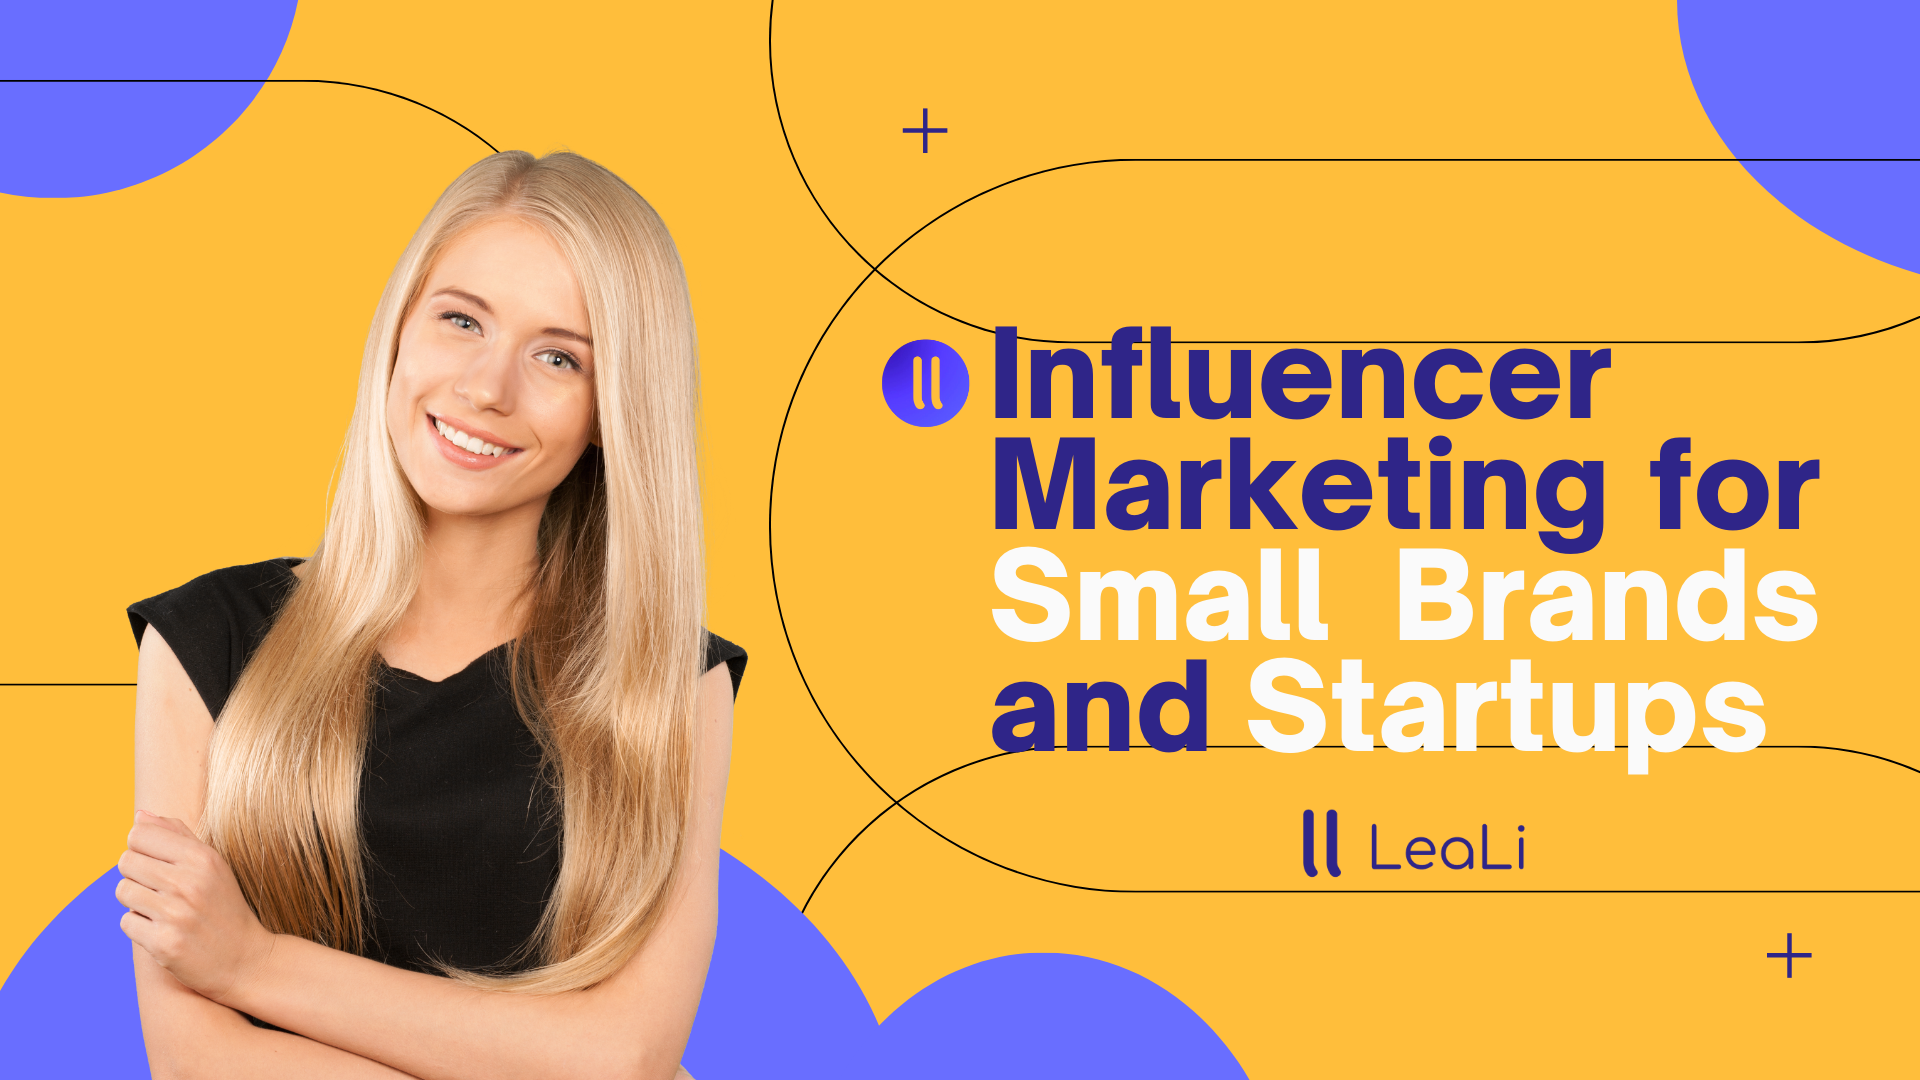 Influencer Marketing for Small Brands and Startups